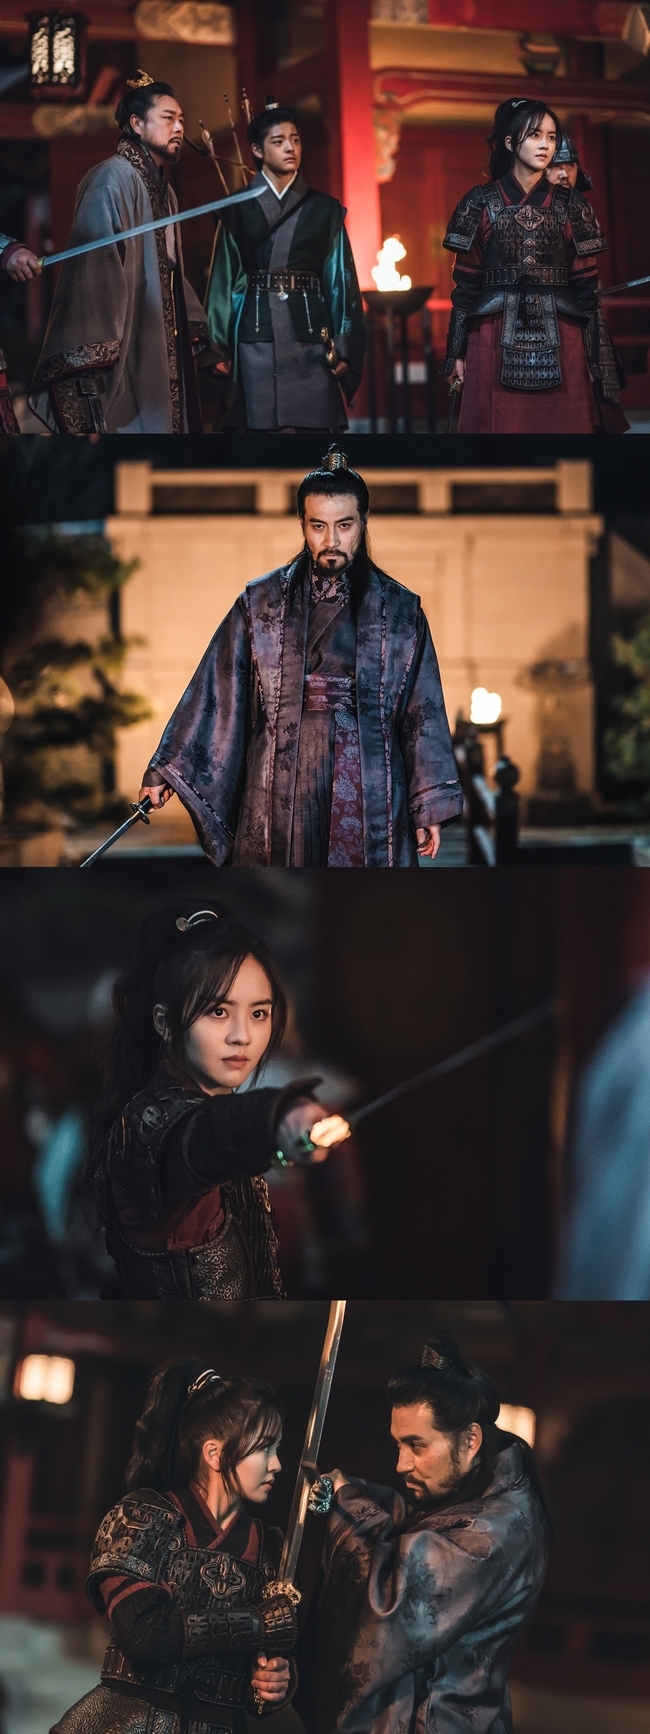 Kim So-hyun and Lee Hae-young, the Moon rising river, play the final confrontation.KBS 2TV Wall Street drama The Moon Rising River (playplay by Han Ji-hoon/director Yoon Sang-ho/production Victory Content) is a fusion historical drama romance that depicts the love of Princess Pyeong-gang (Kim So-hyun), who was the whole of Goguryeos life, and the love of General Ondal (Nine Woo-bun) who made love a history.The story of Pyeong-gang, who runs to make his dream Goguryeo, and Ondal, who claimed to be the knife of Pyeong-gang to help him, gives a heavy echo to viewers.The biggest obstacle for Pyeong-gang, who is struggling to create a country where people can live like people, is the Plateau table (Lee Hae-young), a figure who killed Pyeong-gangs mother, Queen Yeon (Kim So-hyun), to take power, and who toppled the innocent of Ondal. It was the beginning of all the tragedies - the ones that Gang had gone through.While Pyeong-gang was away, he made King Taewang Pyeongwon (Kim Beop-rae) a scarecrow king and held Goguryeo.However, the plot of the Plateau table, which attempted to bring up the local saints and topple the Goguryeo royal family, failed by Ondal leading the subjugation and suppressing all the rebels.So, the Plateau ticket and the rich man Goh Kun (Lee Ji-hoon) were imprisoned, but Haemo Yong (Choi Yoo-hwa), who loves Goh Kun, moved to get them out and added questions about the future story.In the meantime, the Moon Rising River side unveiled a still cut that shows the confrontation between Pyeong-gang and Plateau.Plateau, which has no place to back down, and Pyeong-gangs lifetime confrontation, which has to stop such a Plateau ticket, attracts attention.The photo shows Pyeong-gang standing in front of his father, King Pyeongwon (Kim Beop-rae) and his brother Won (Park Sang-hoon) to protect them.I feel an unusual life in the Plateau table, which appeared with a knife in front of them. The charisma of Pyeong-gang, who pointed a knife at such a Plateau table, is also unbelievable.